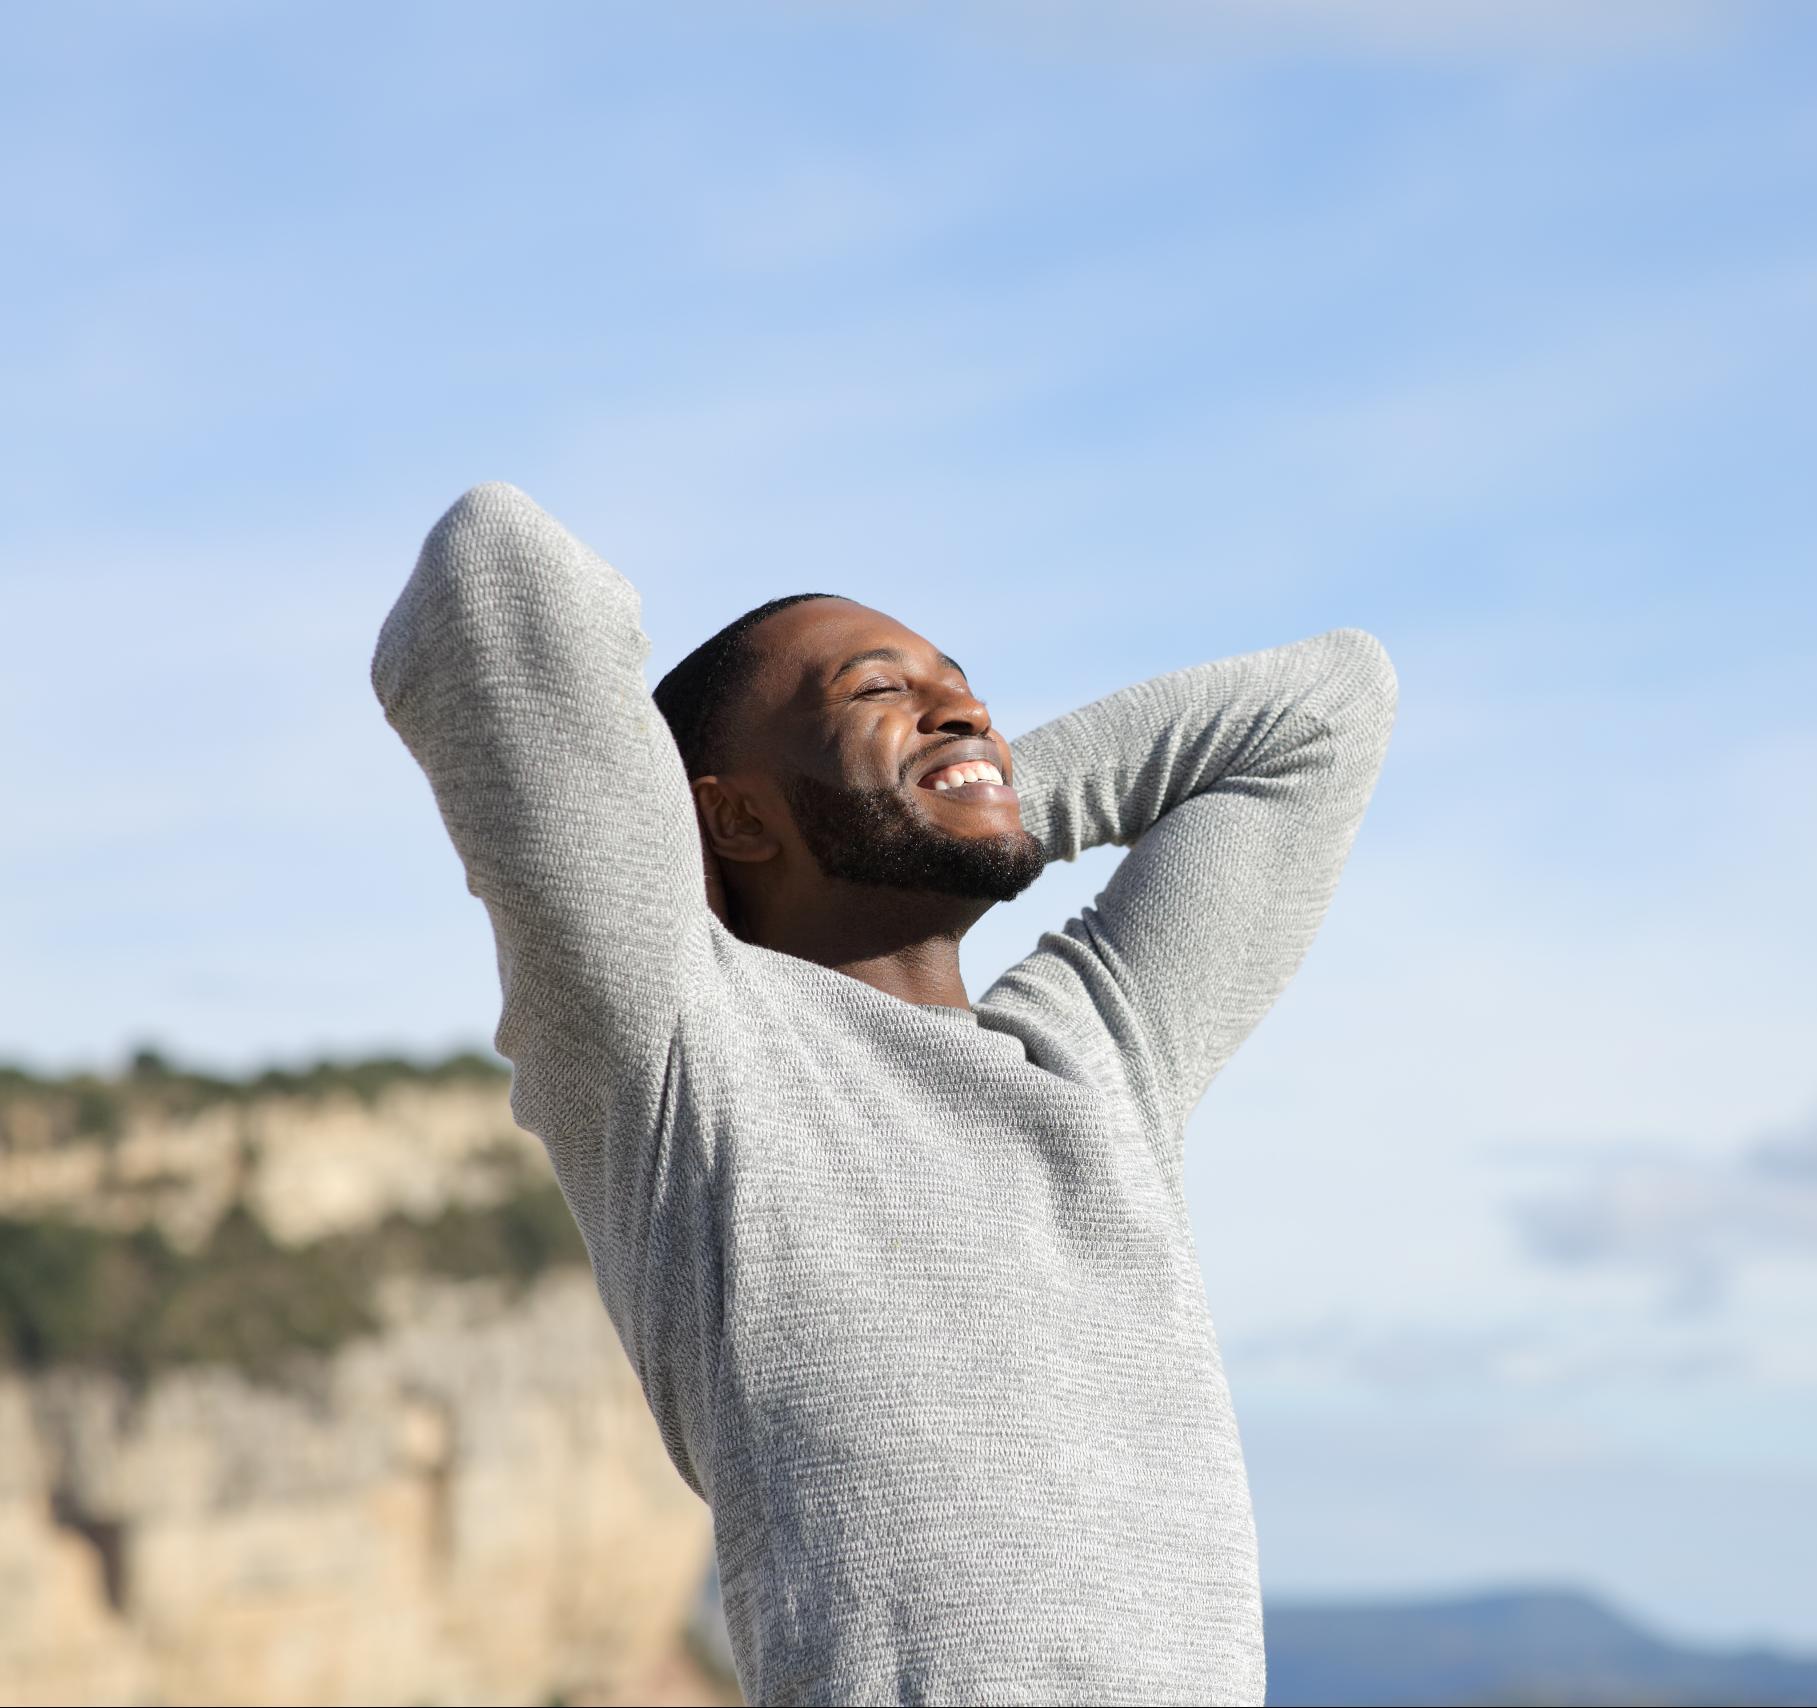 Relaxed man with black skin breathing in the mountain